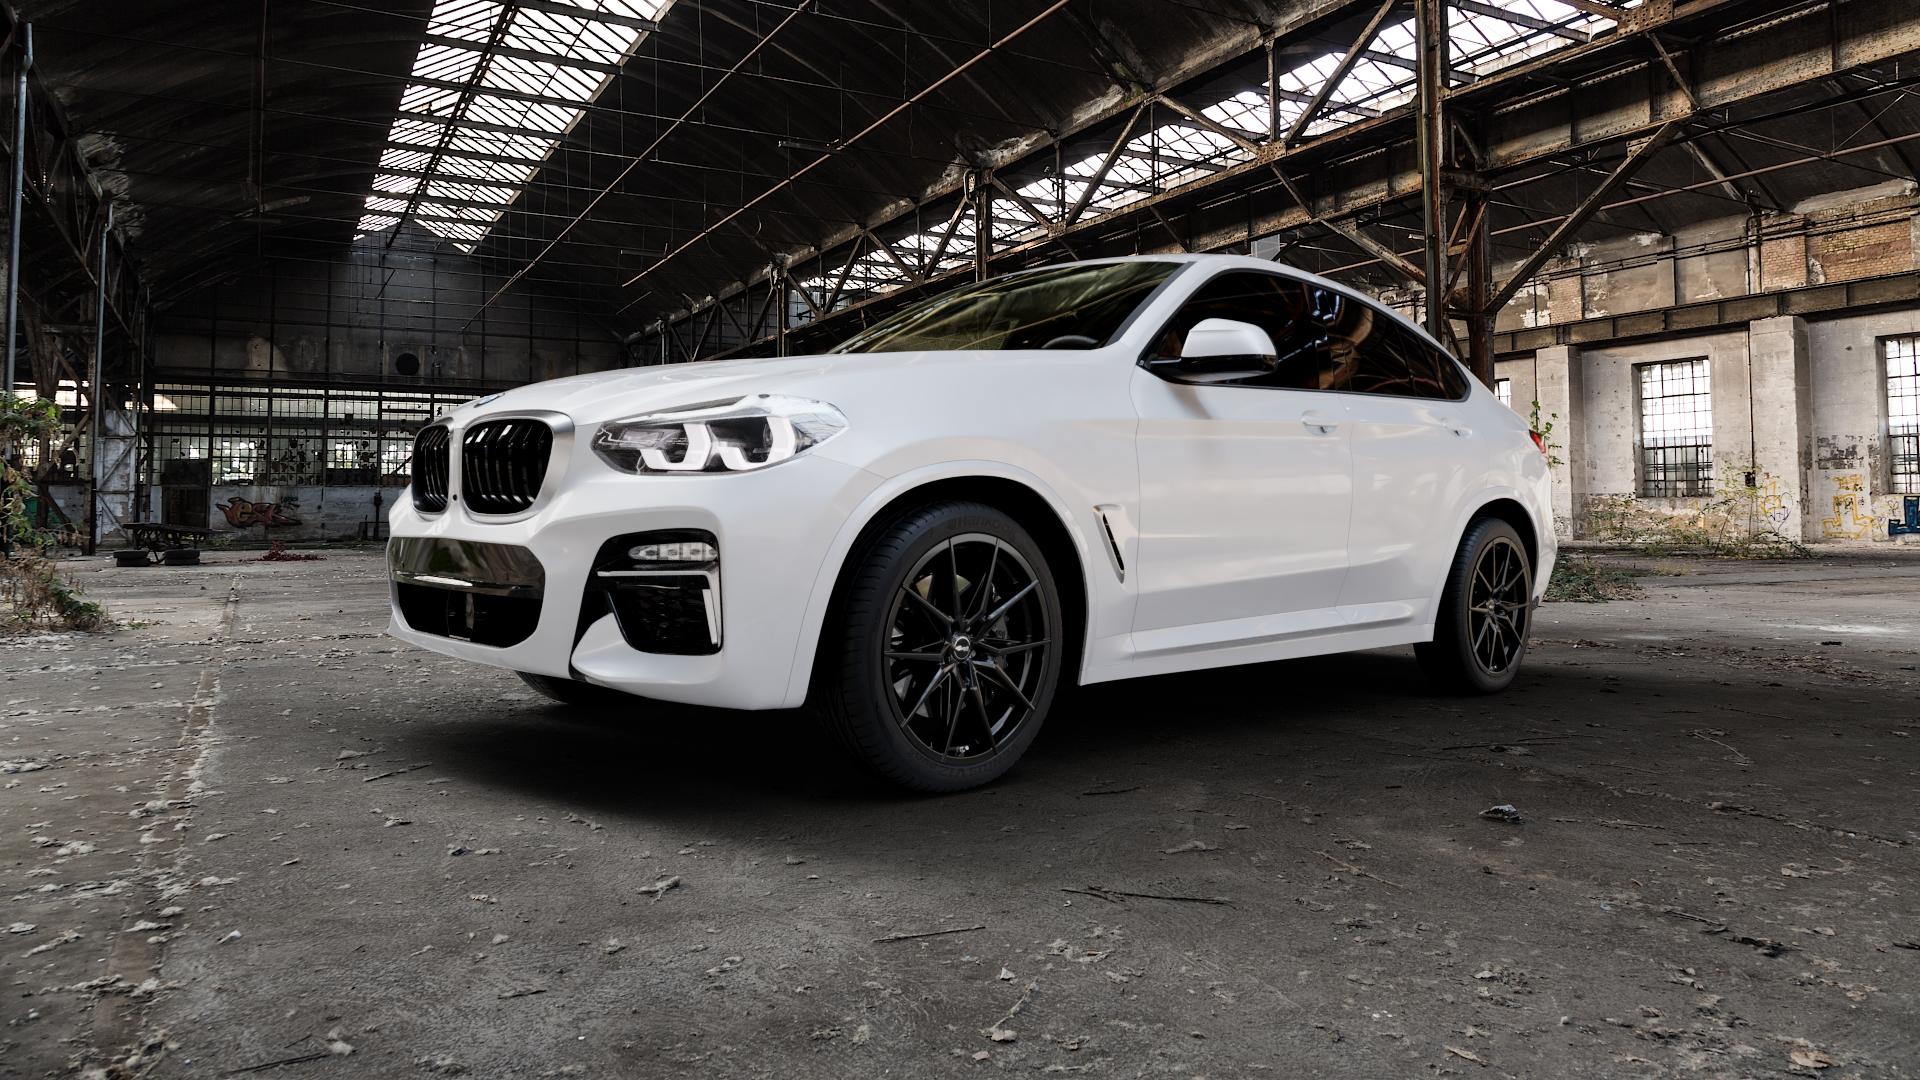 BMW X4 Type G02 (G4X) 3,0l xDrive30d 210kW Mild-Hybrid (286 hp) Wheels and  Tyre Packages | velonity.com